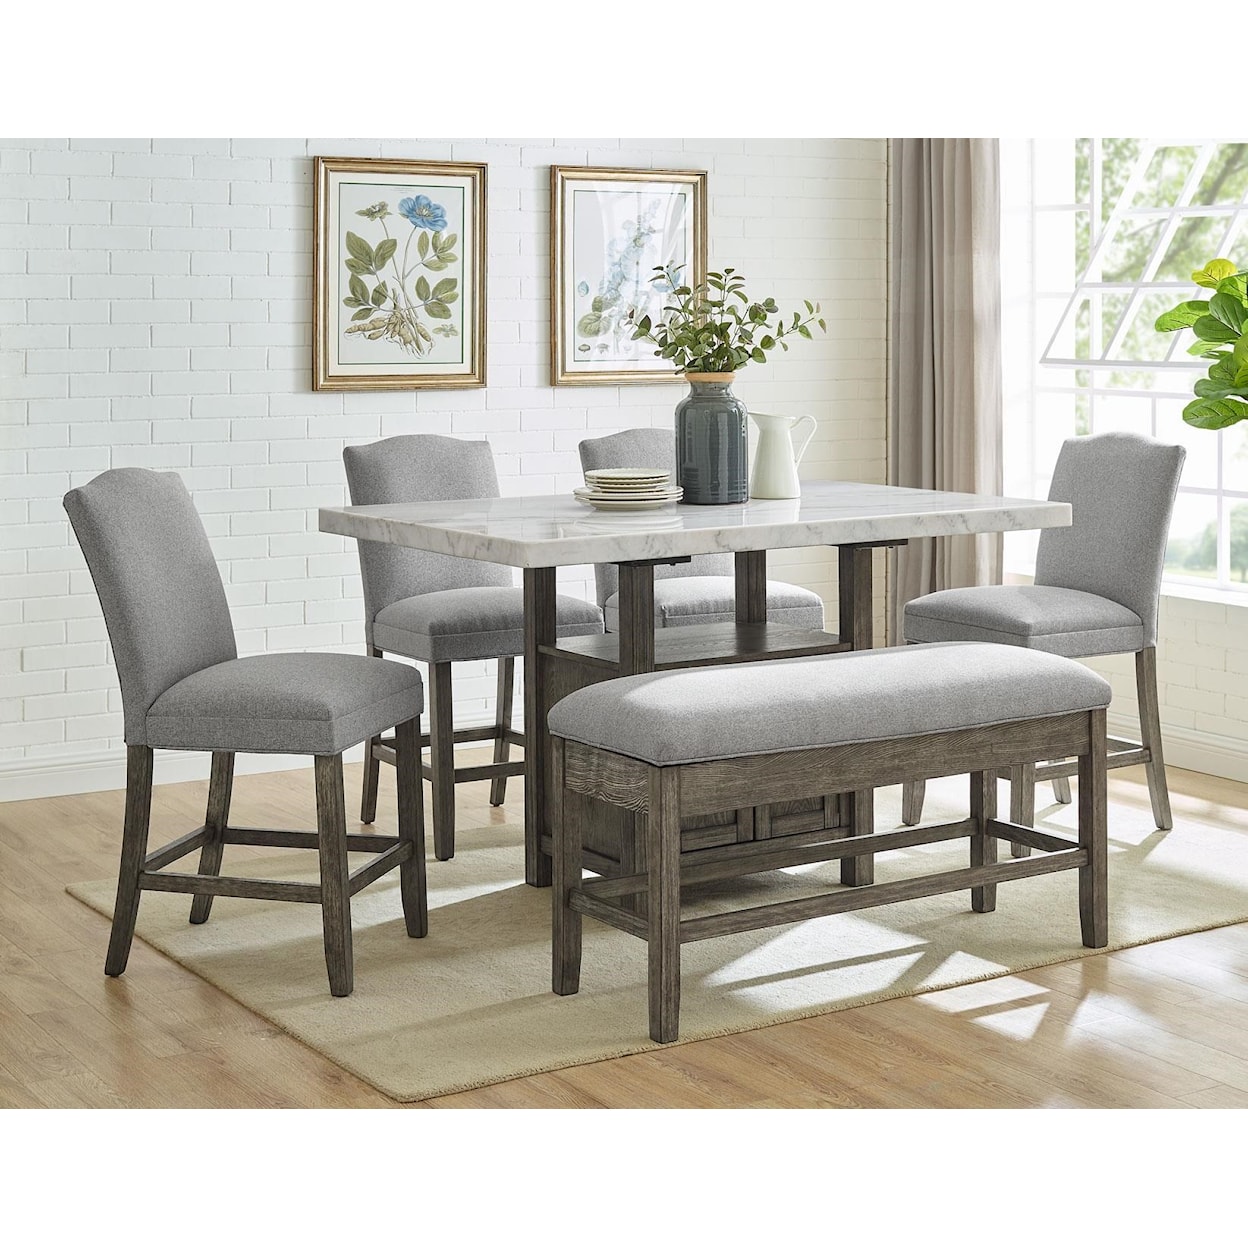 Steve Silver Ethan Ethan 5-Piece Counter Height Dining Set